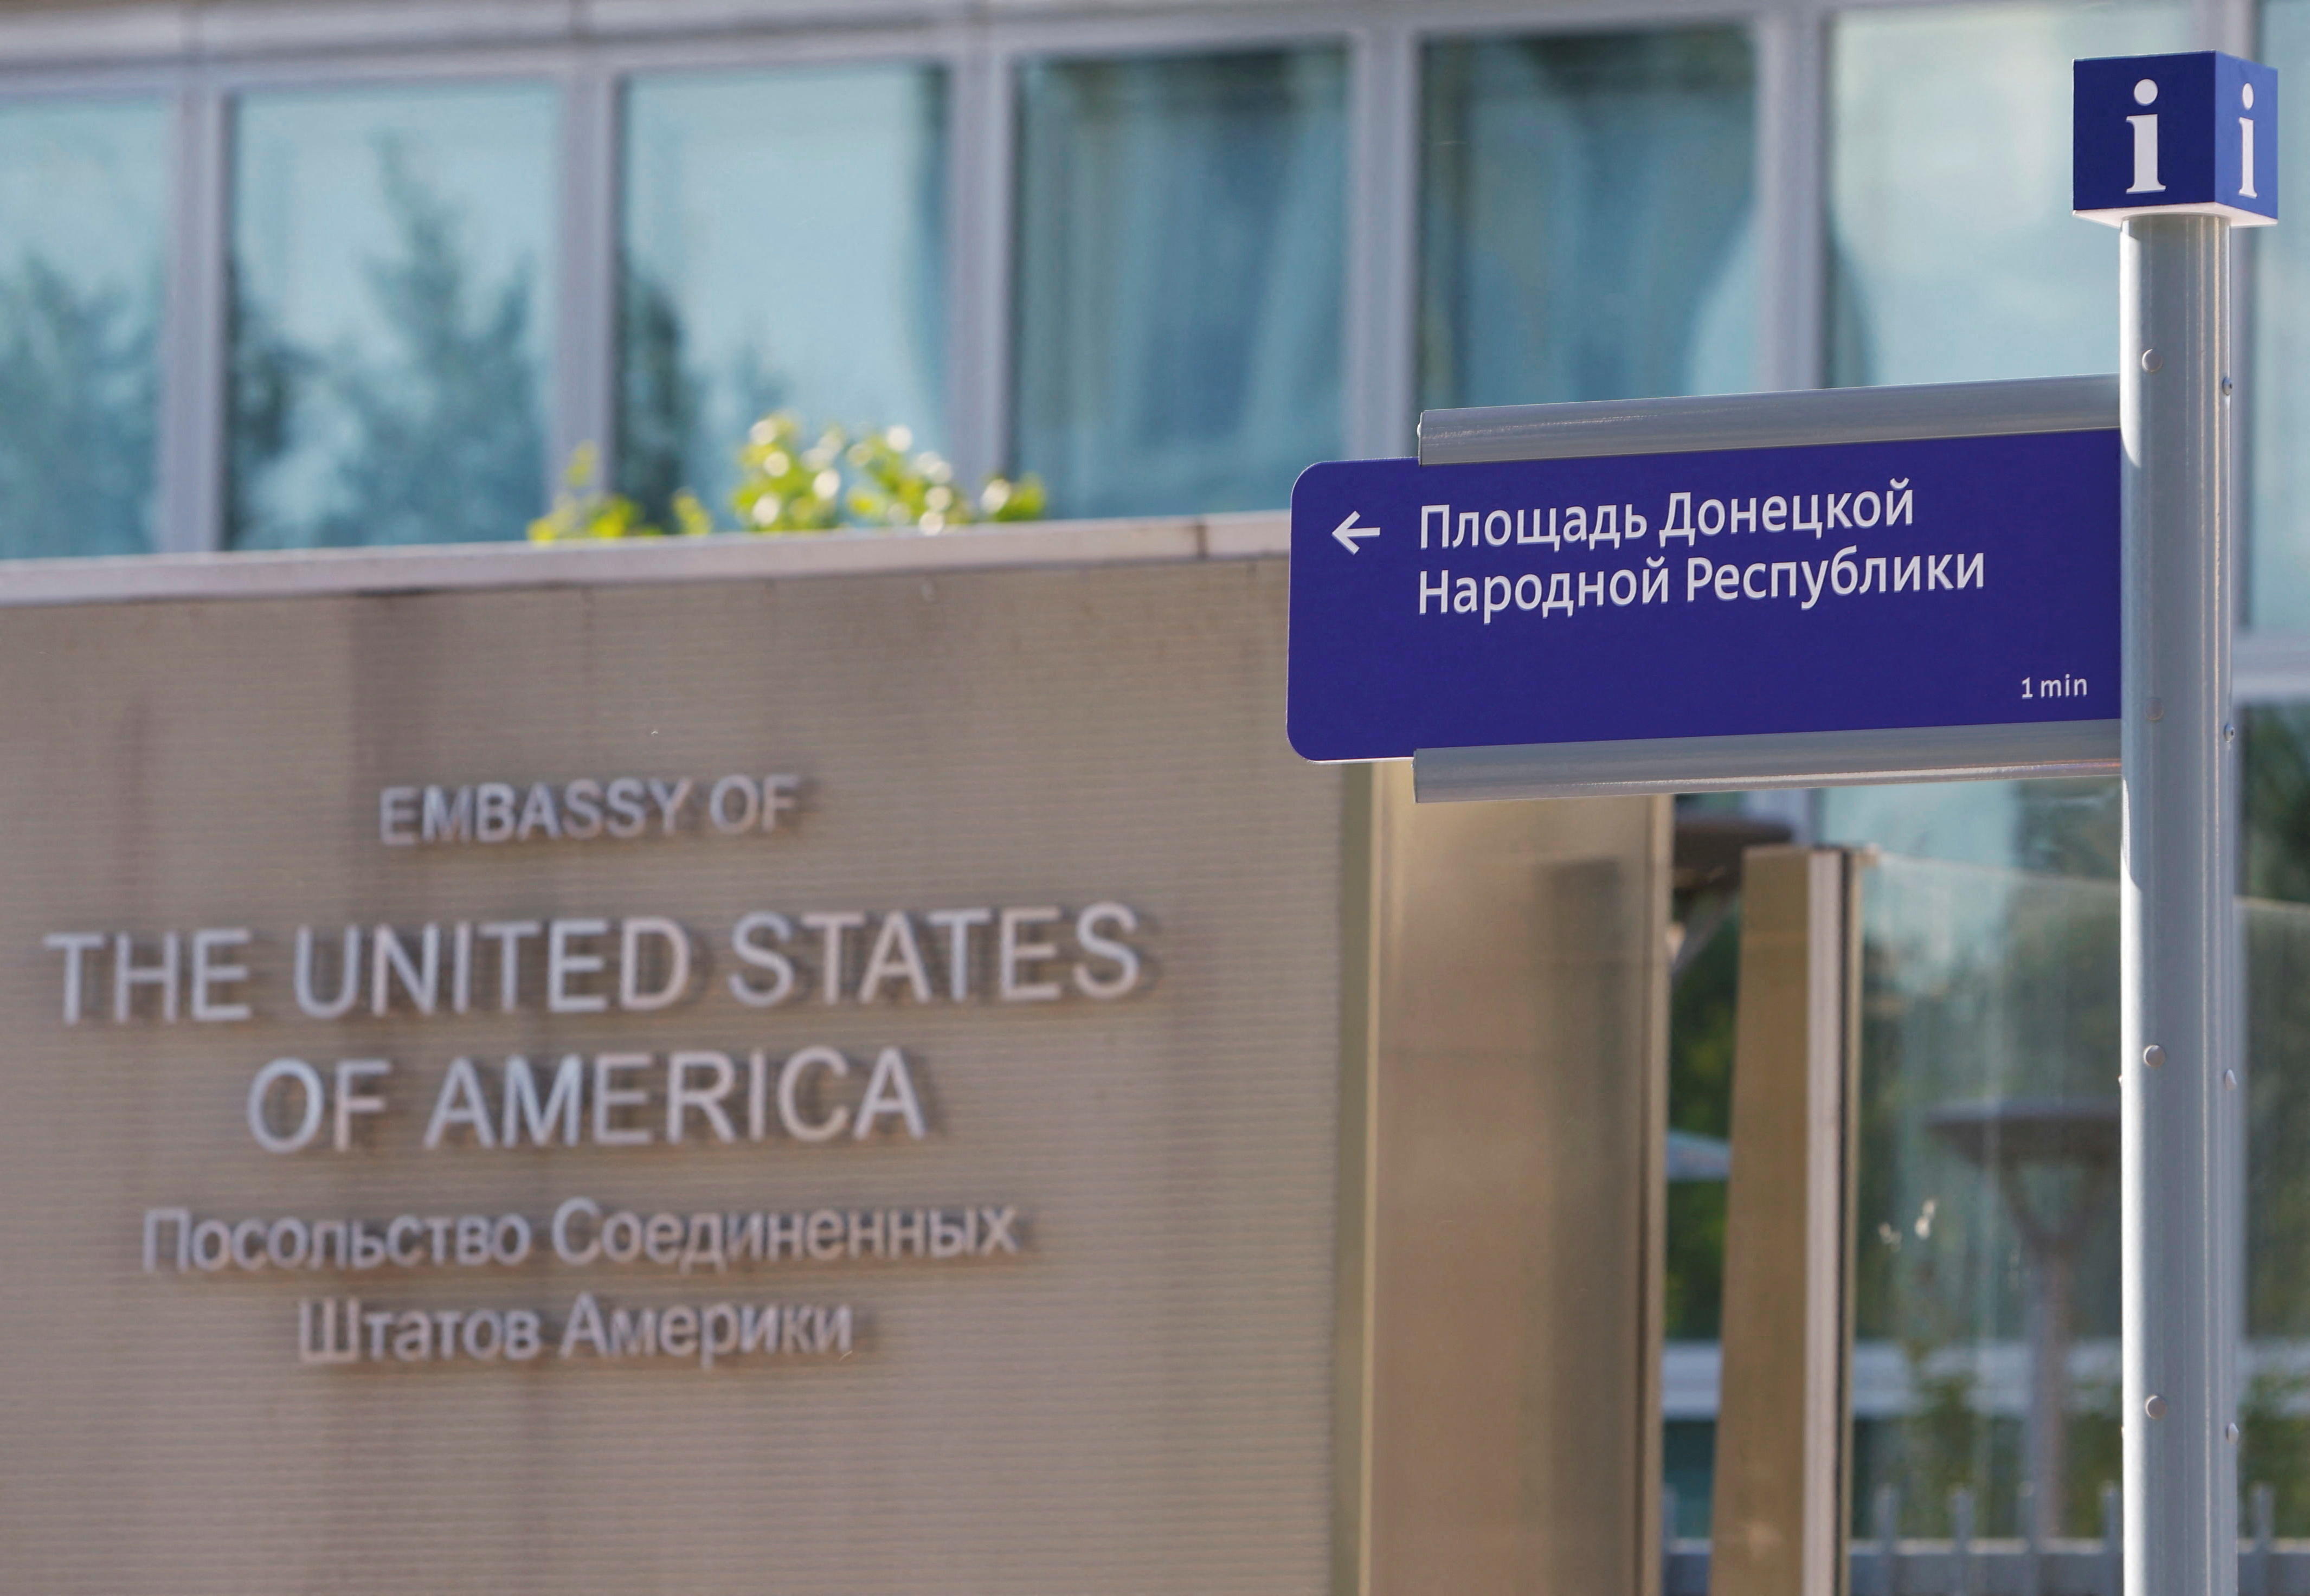 A newly installed direction sign "Donetsk People's Republic Square" is seen in front of the U.S. embassy in Moscow, Russia on June 22, 2022.